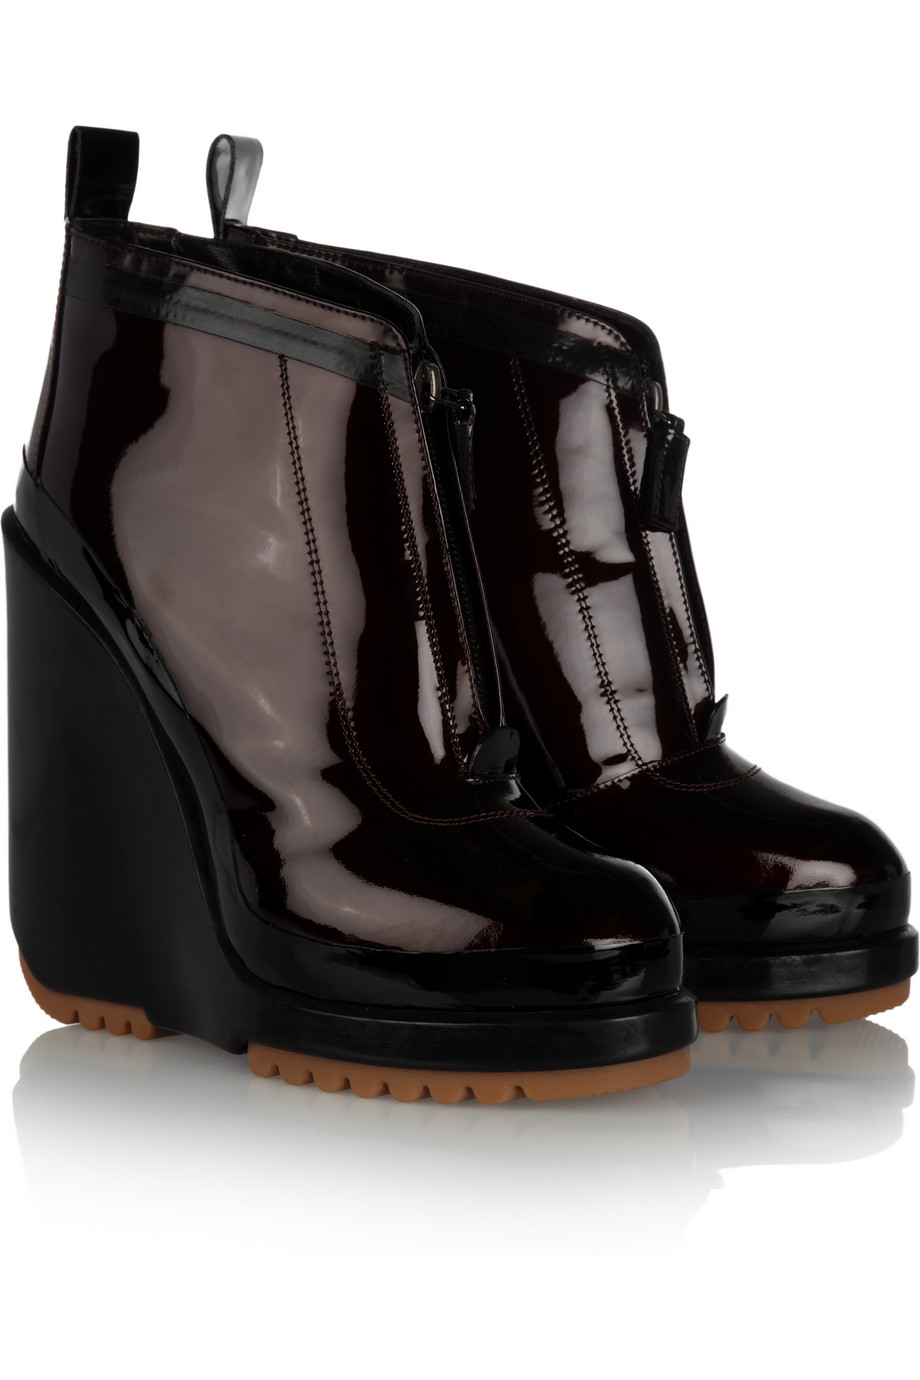 patent leather wedge boots